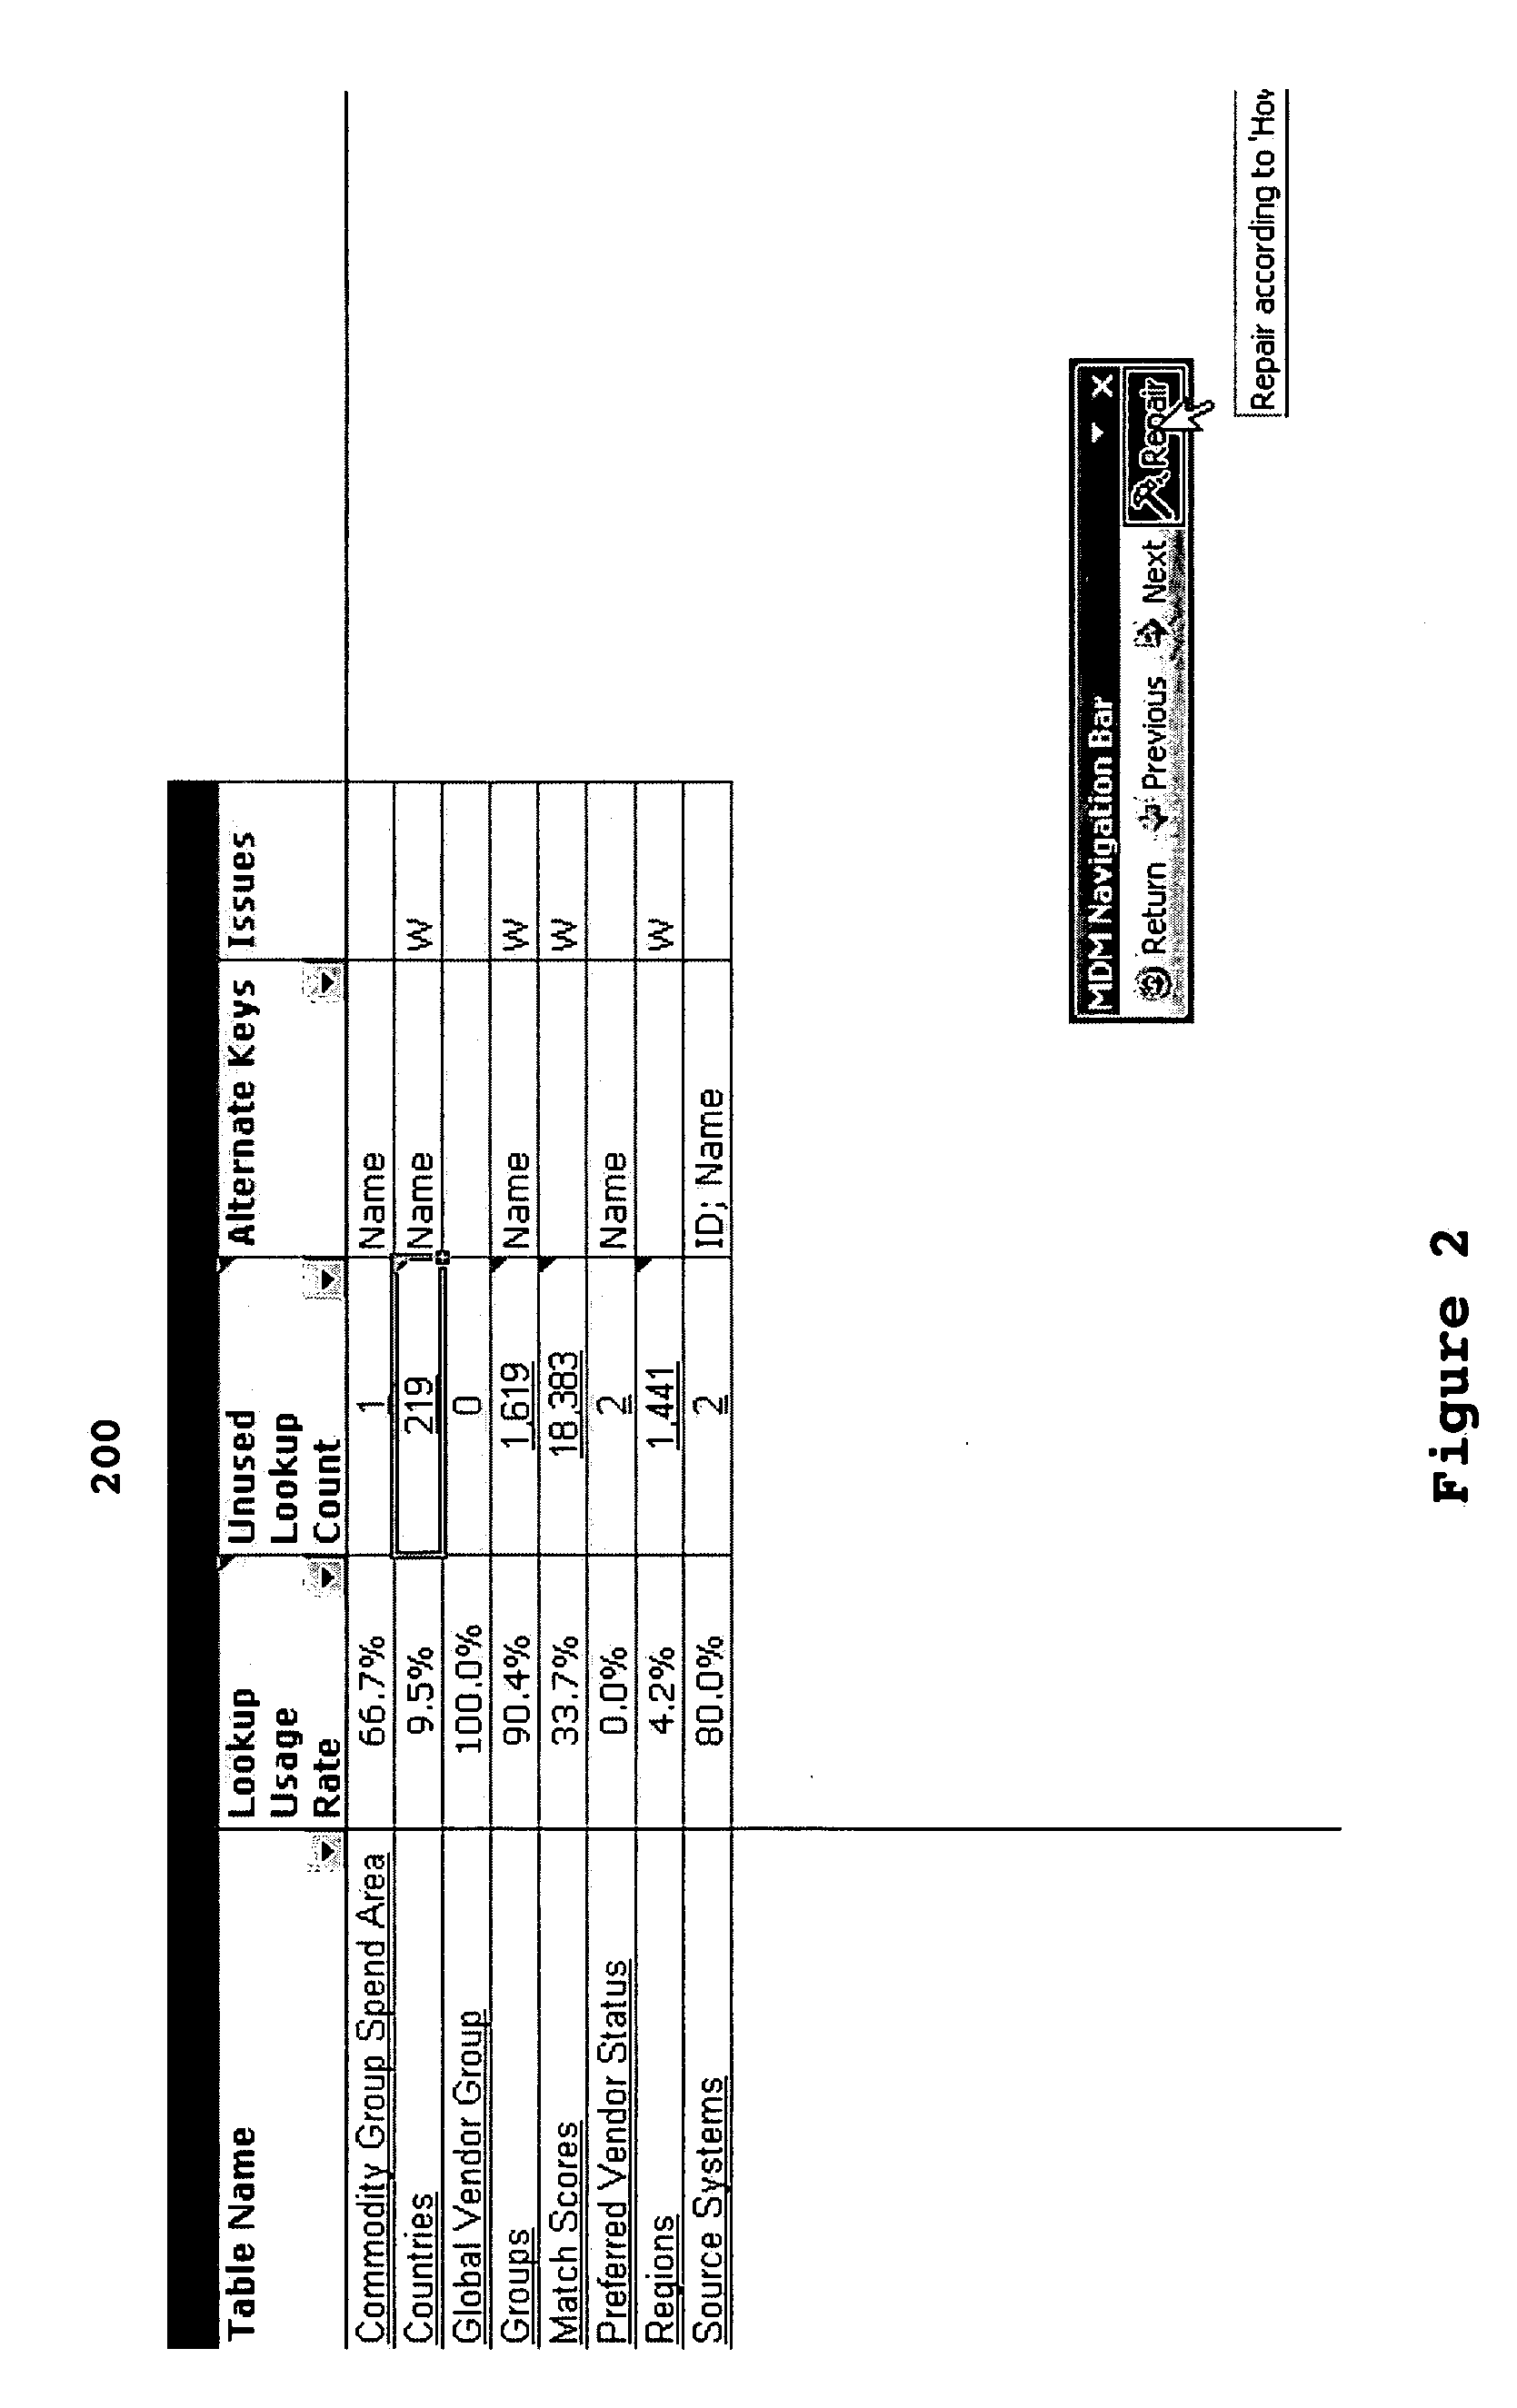 Method for verification of data and metadata in a data repository